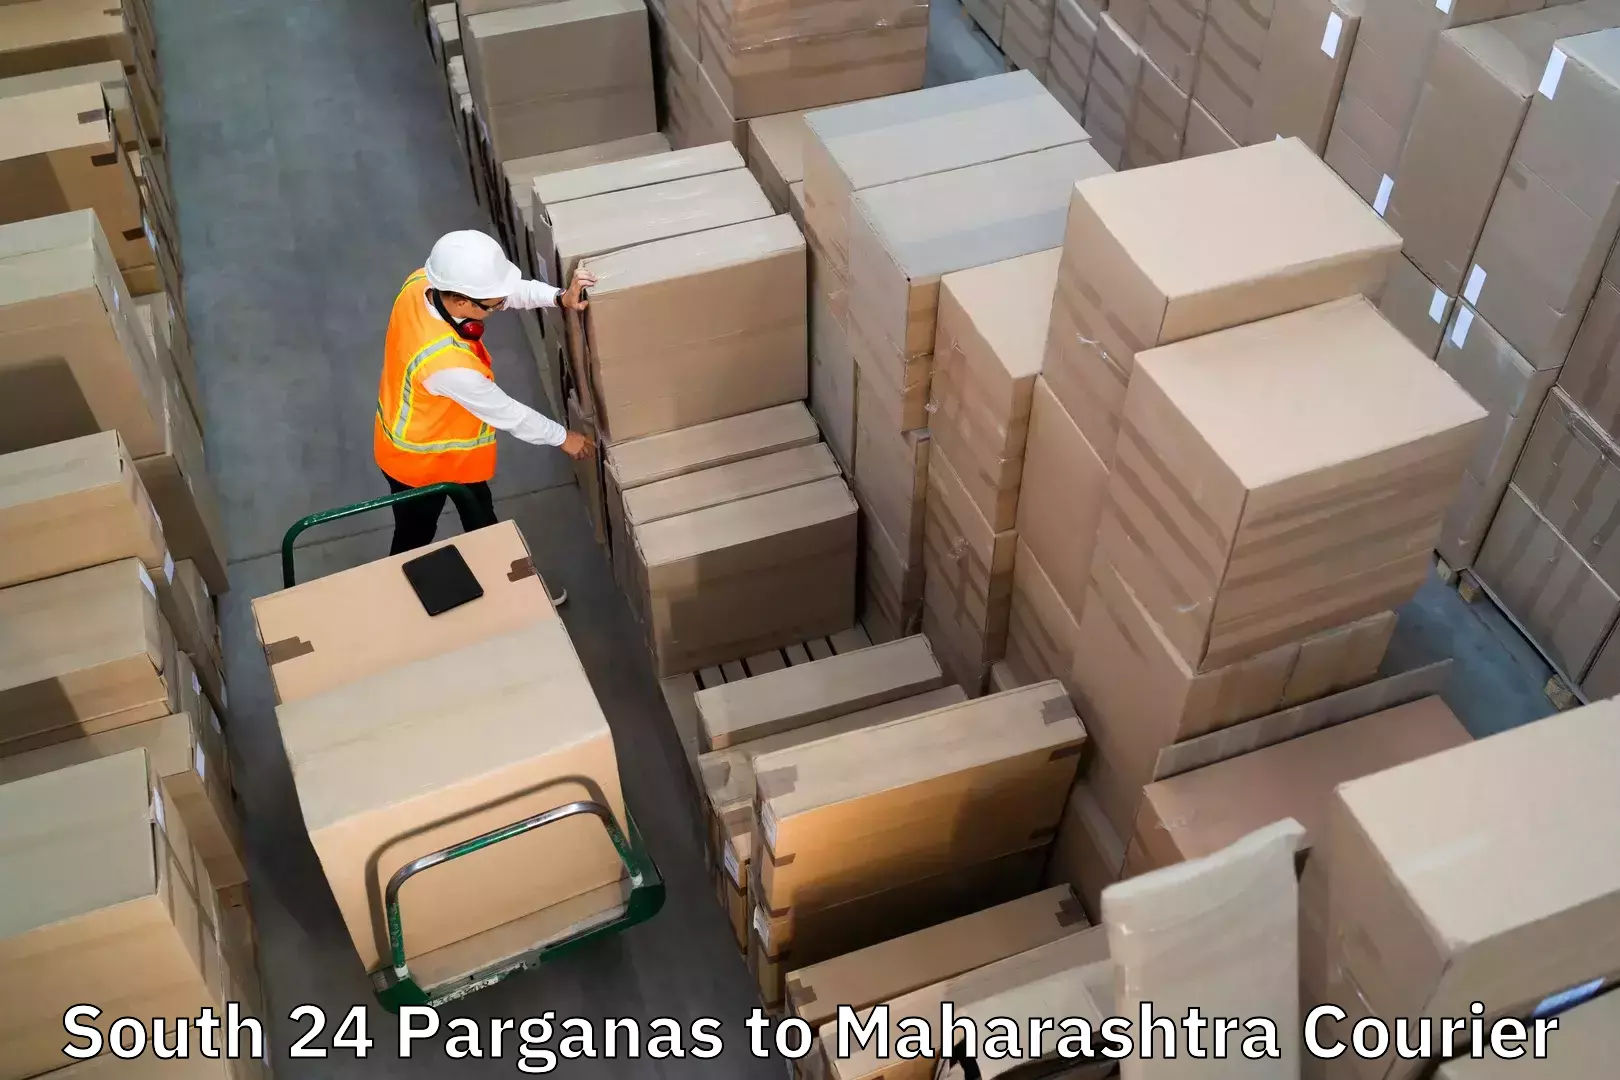 Luggage transport consultancy South 24 Parganas to Ulhasnagar